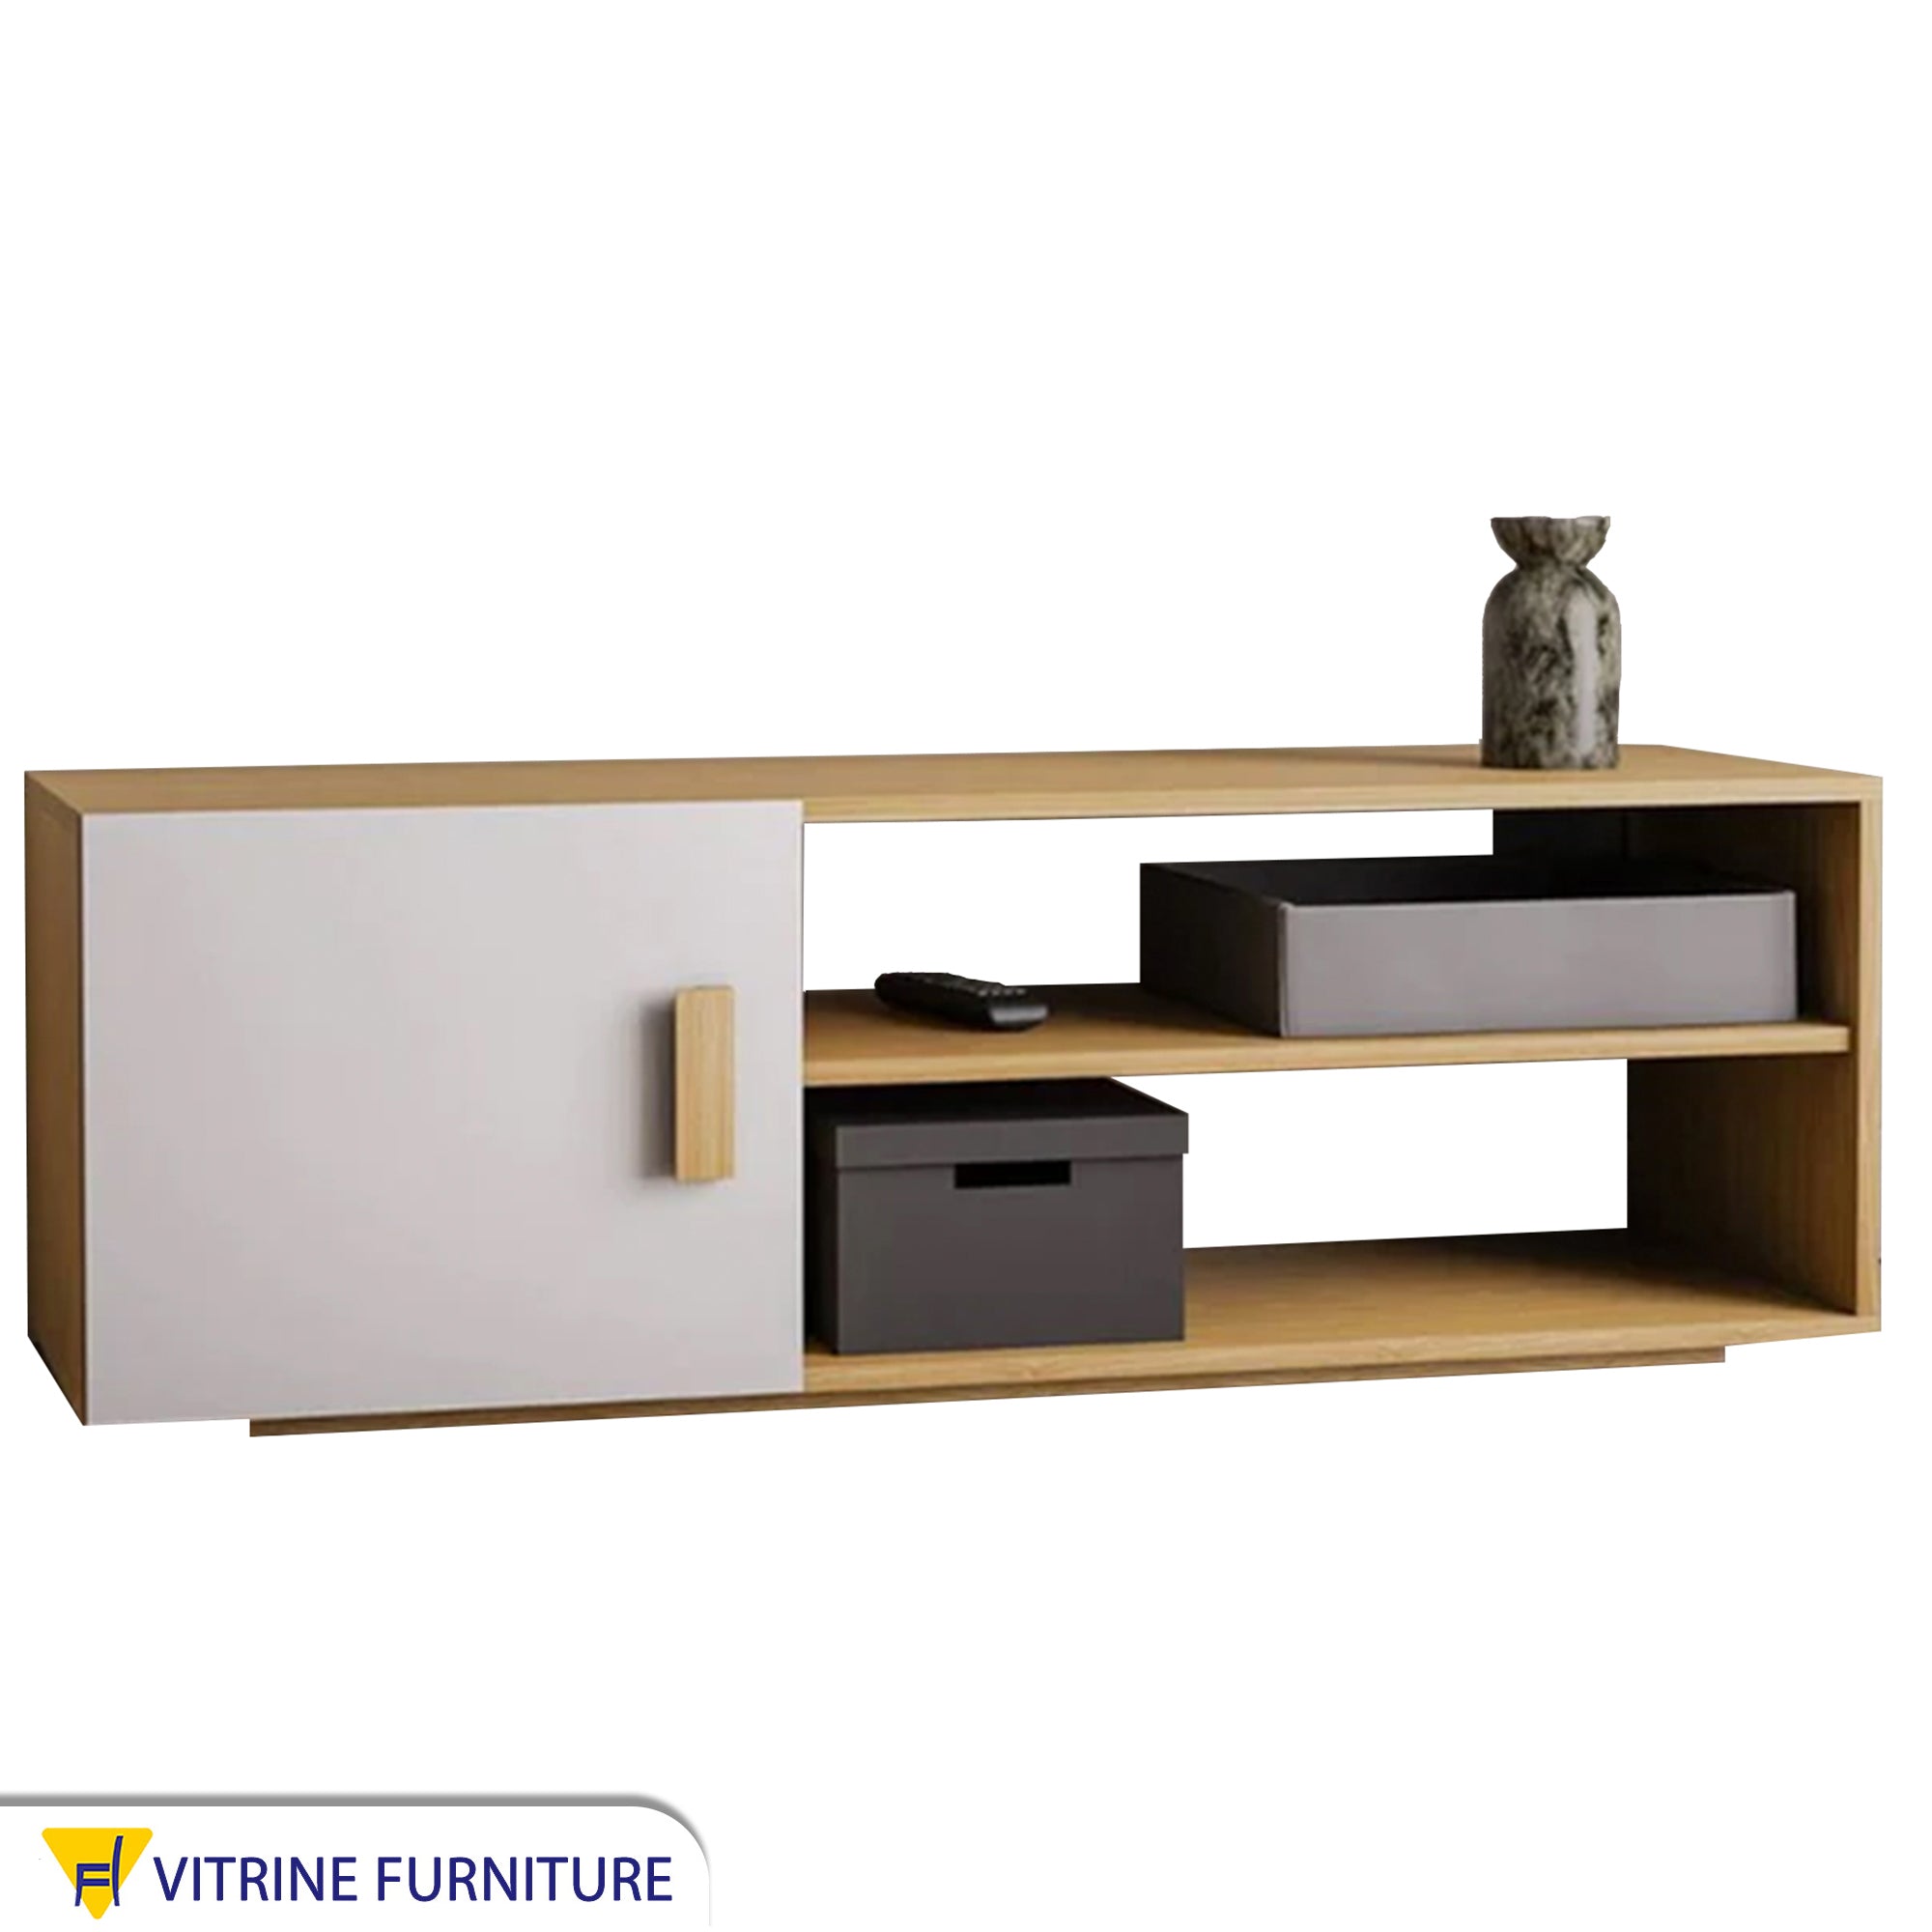 TV unit with two shelves and a movable shutter